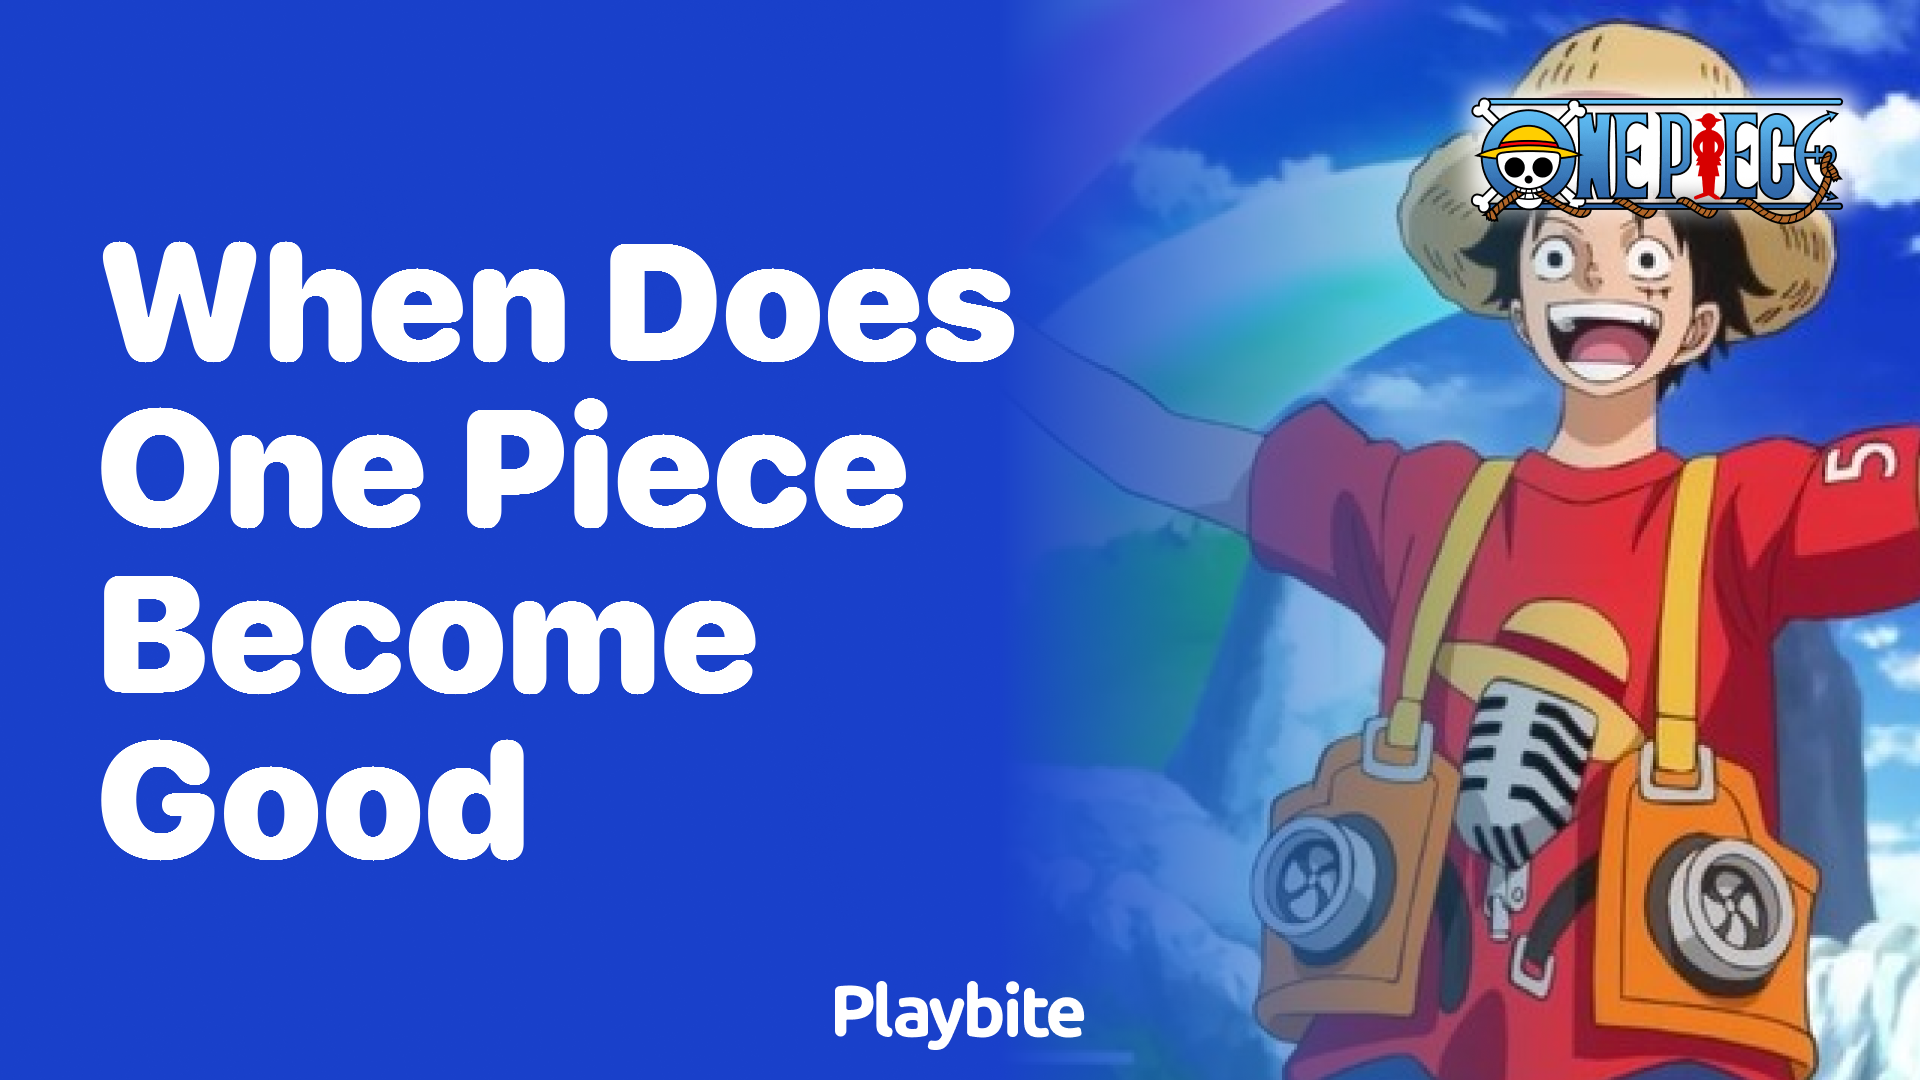 When does One Piece become good?